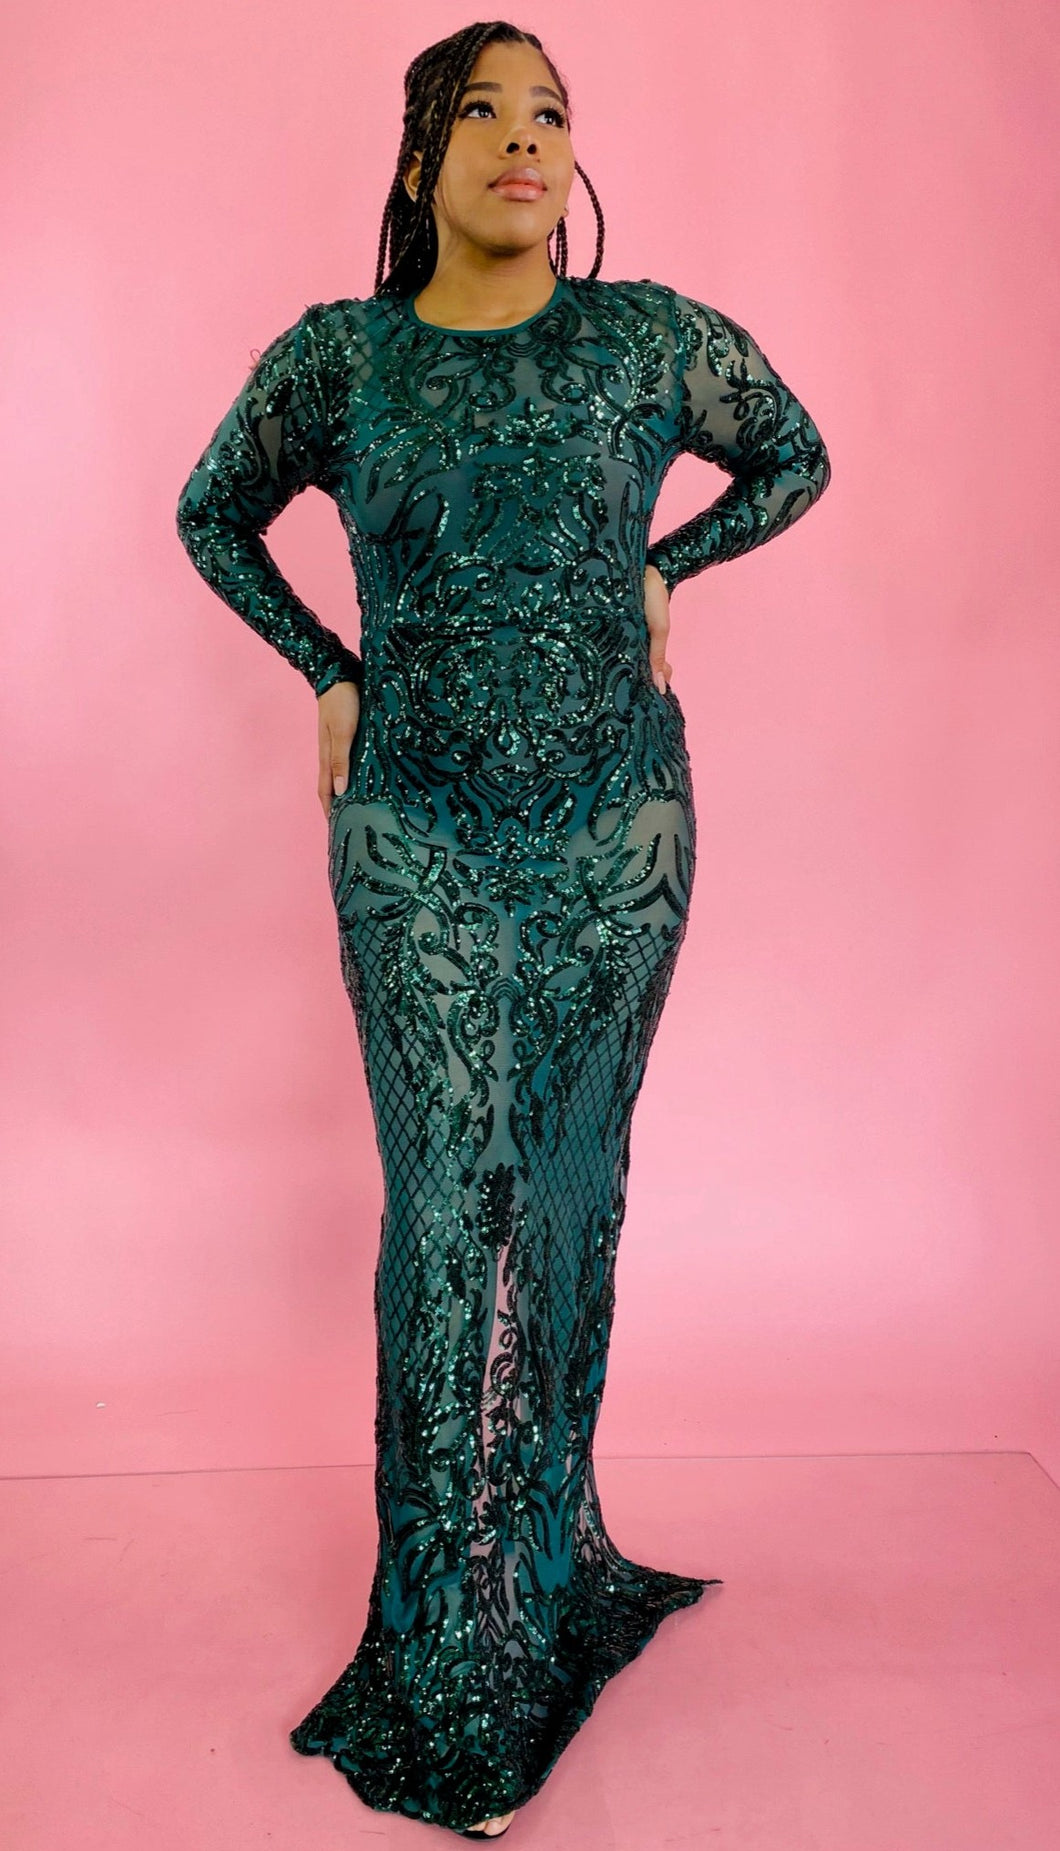 Full-body front view of a size 12/14 Melissa Mercedes emerald green body-hugging floor-length gown with intricate mesh, bead, and sequin work all throughout and a slit at the back on a size 14 model.